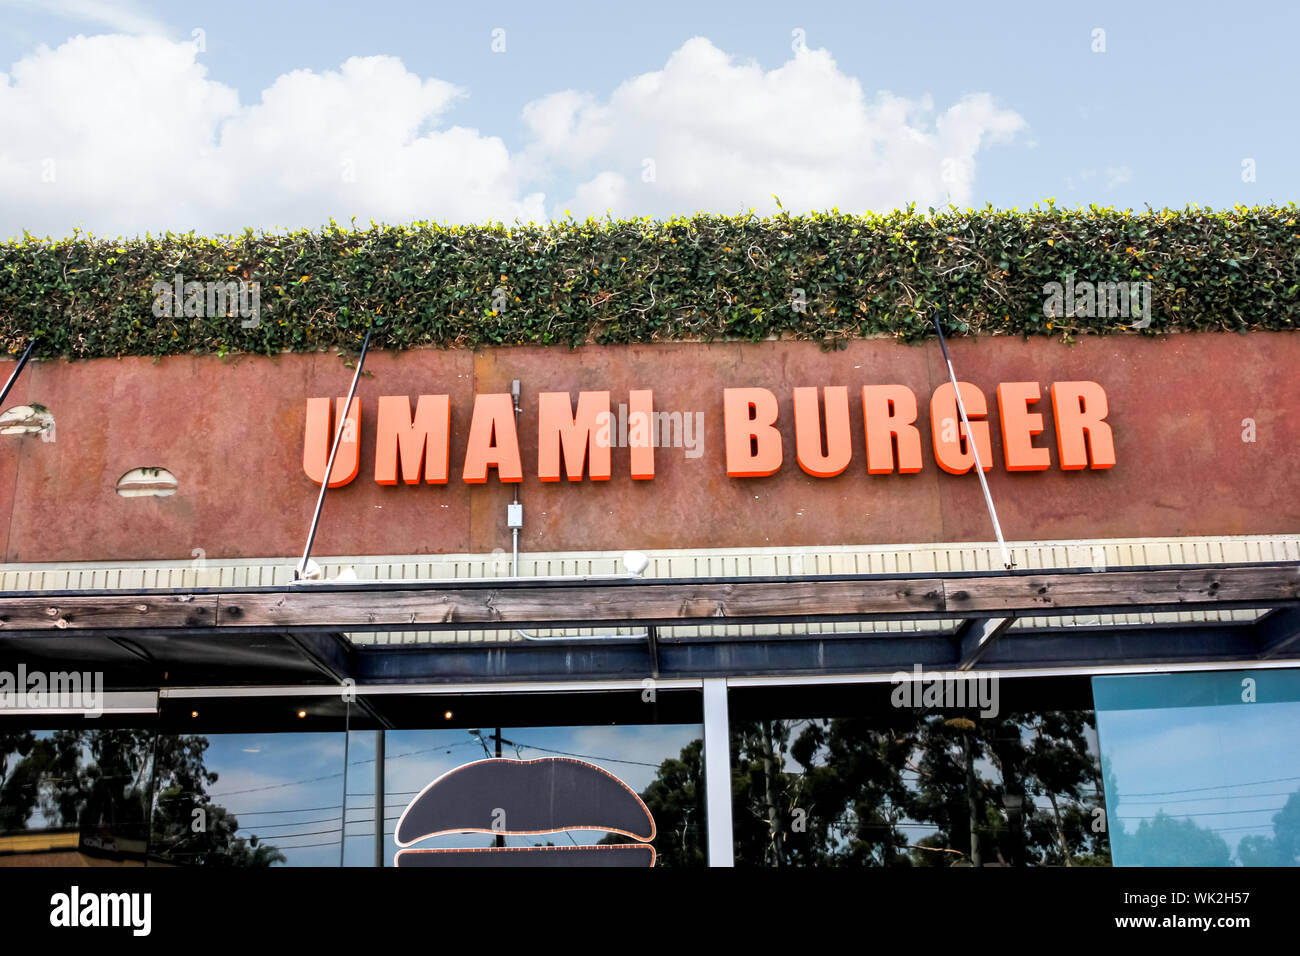 A store front sign for the gourmet burger chain known as Umami Burger, located at The Camp Stock Photo